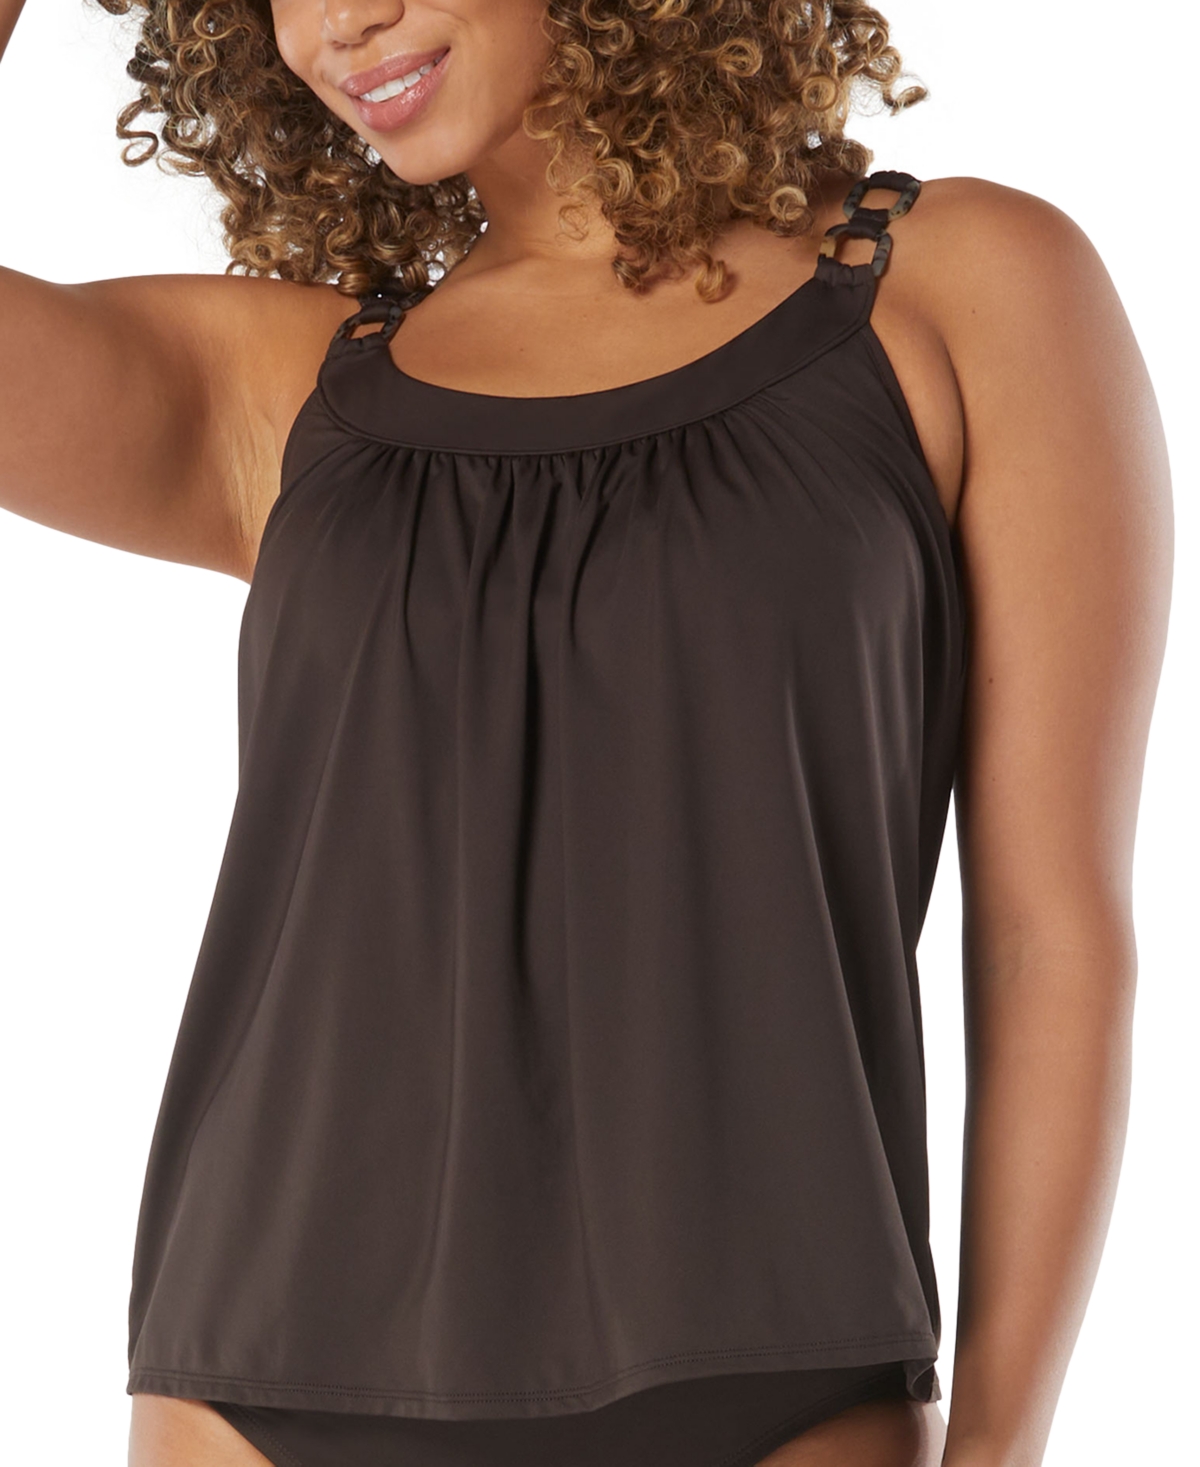 Coco Reef Women's Ultra Fit Embellished-strap Tankini Top In Brown